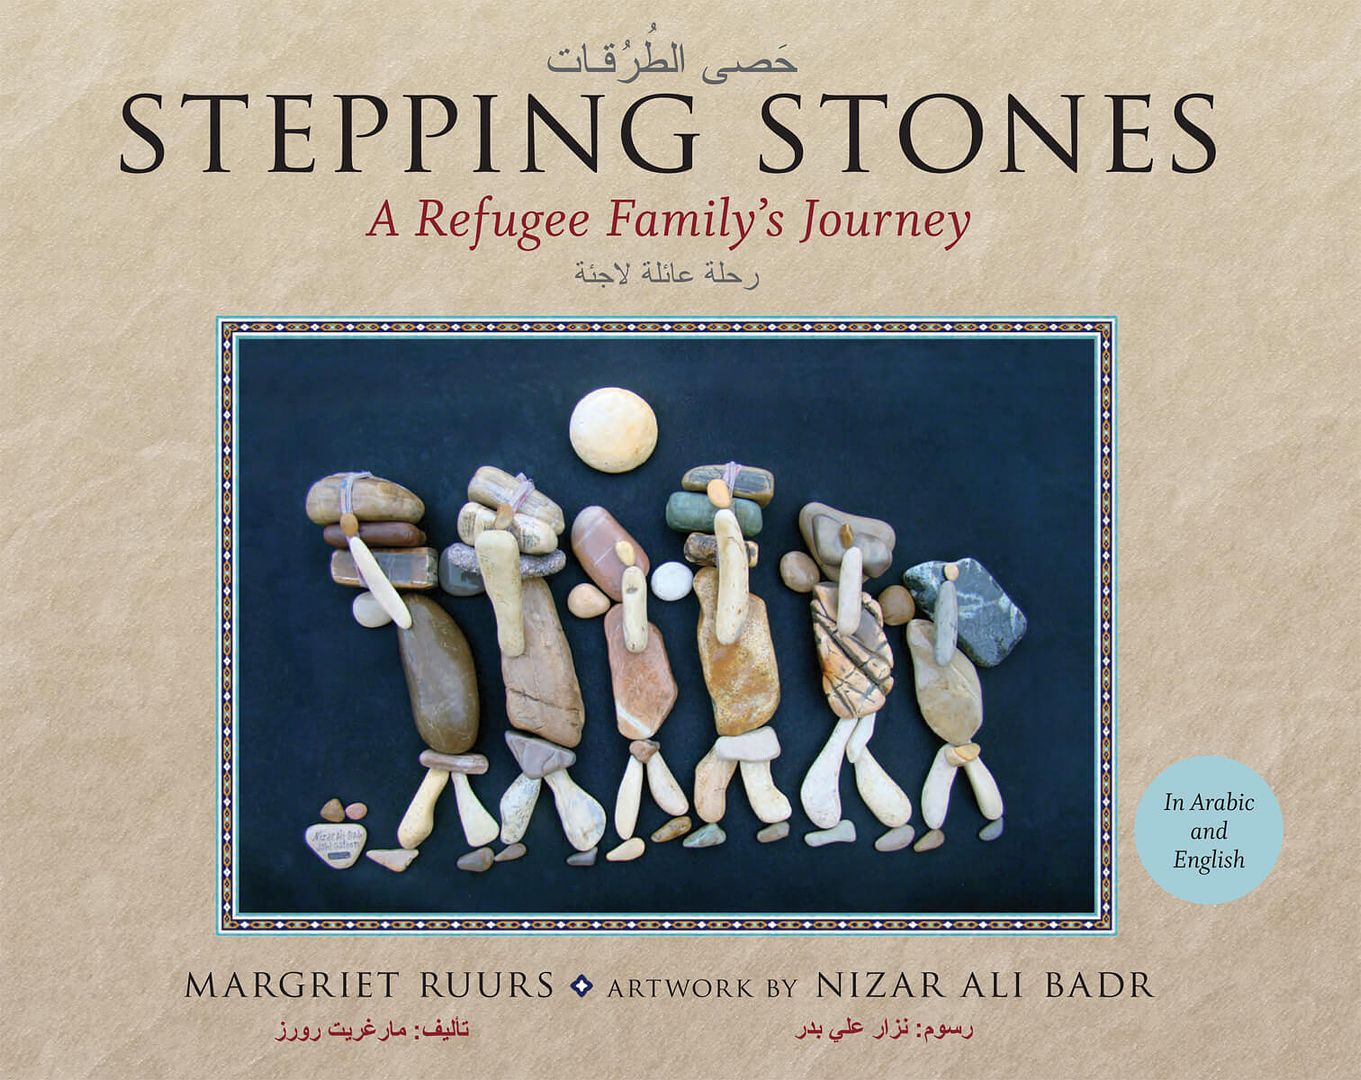 Wonderful children's books about the immigrant experience: Stepping Stones, a Refugee Family's Journey